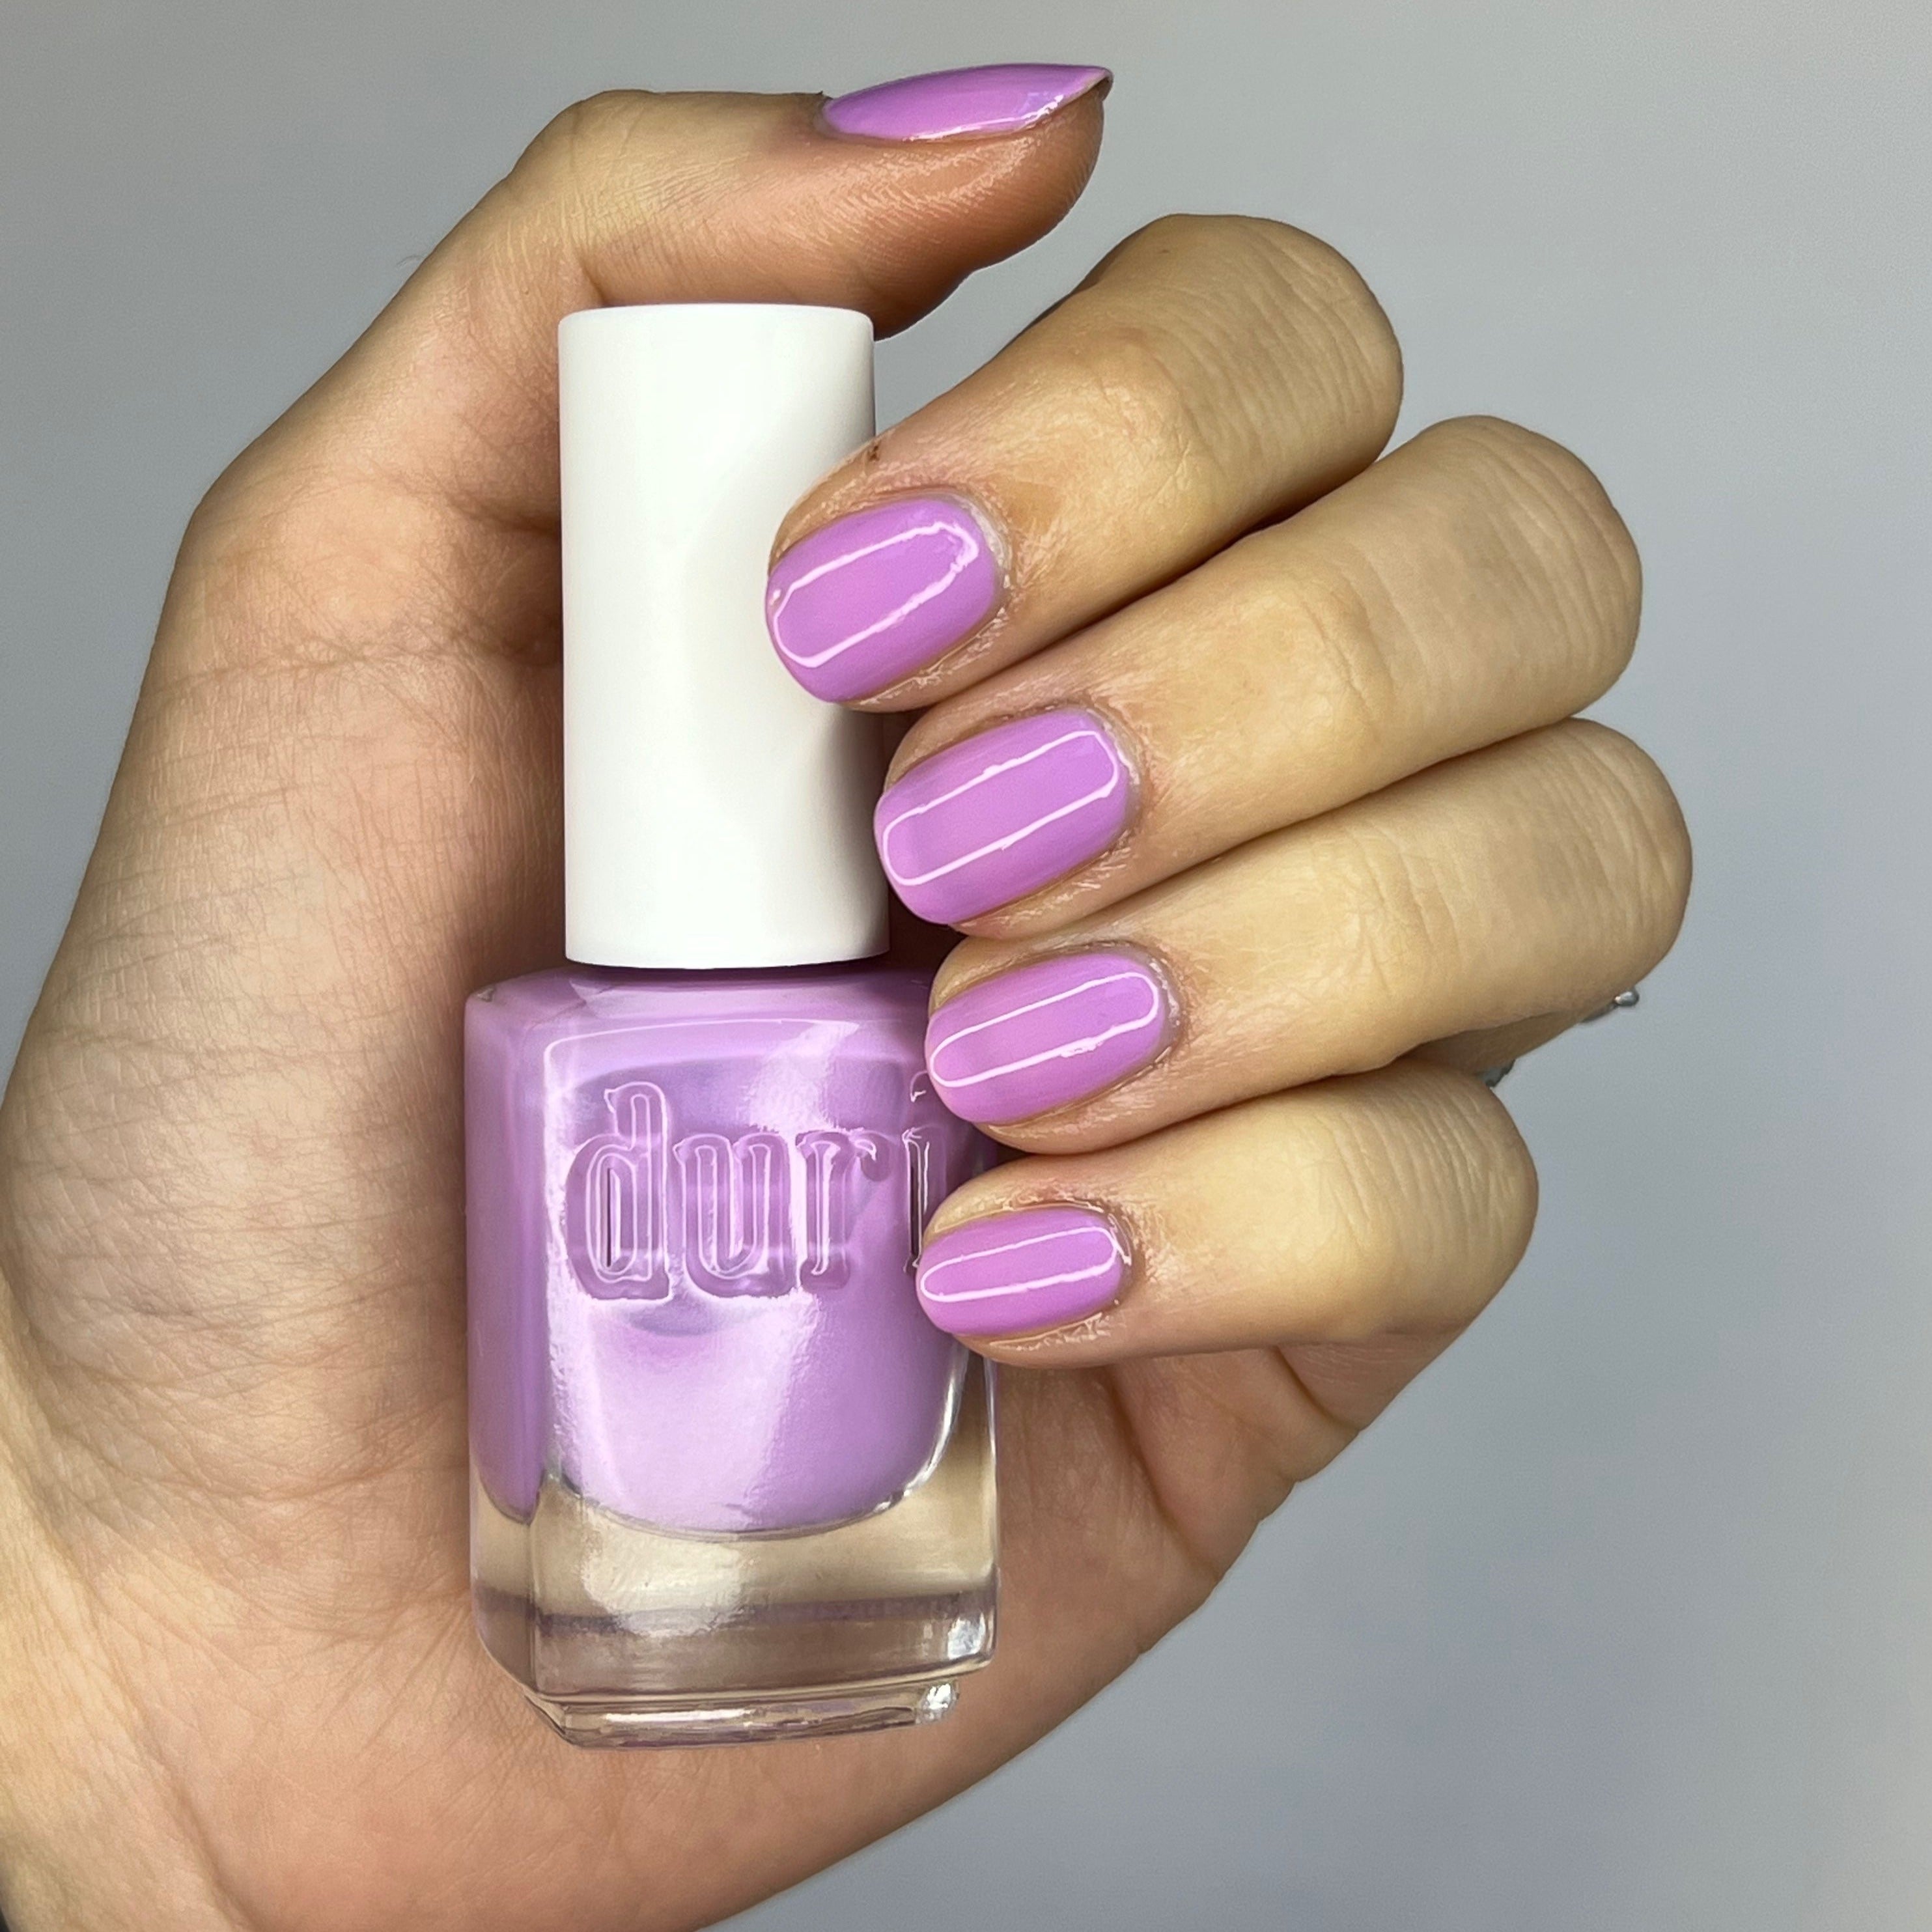 Semi-sheer lavender nail polish by duri cosmetics. 365 Delicious, the coolest color for spring. 